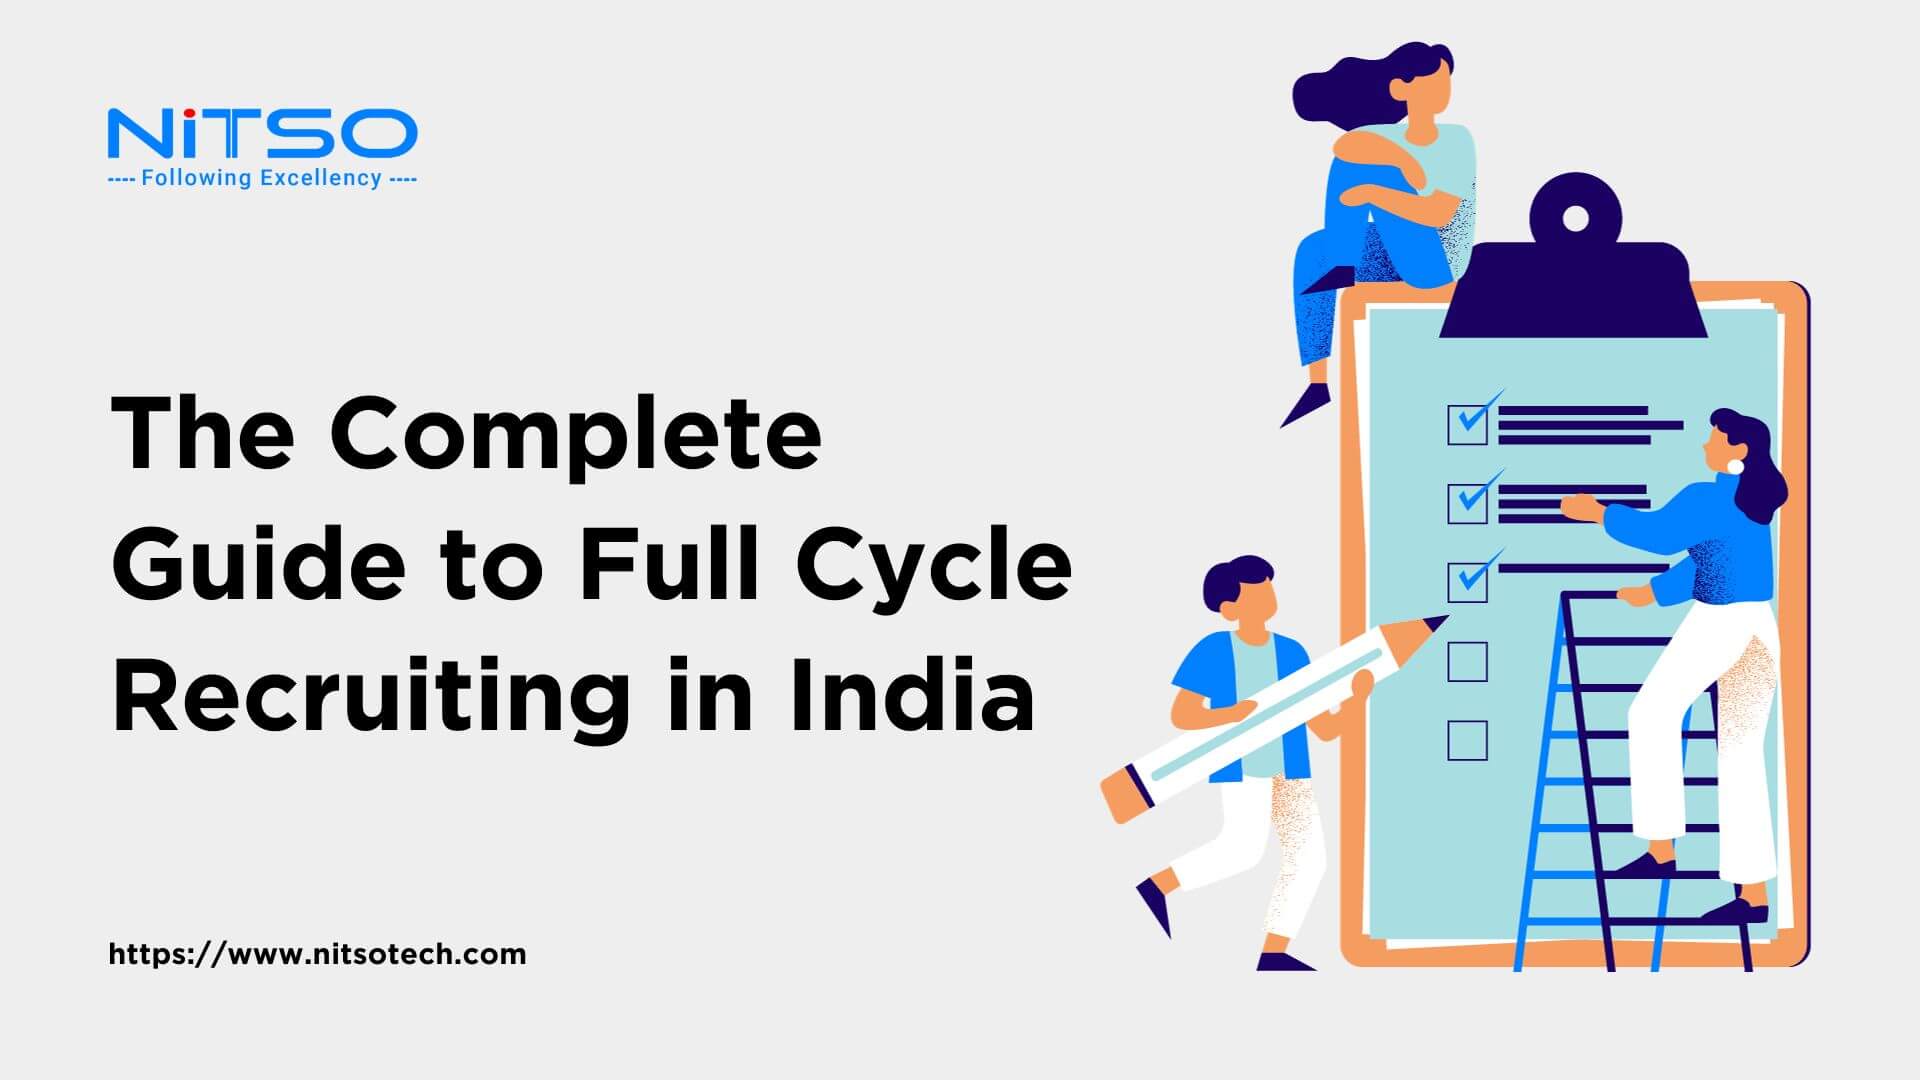 The Complete Guide to Full Cycle Recruiting in India